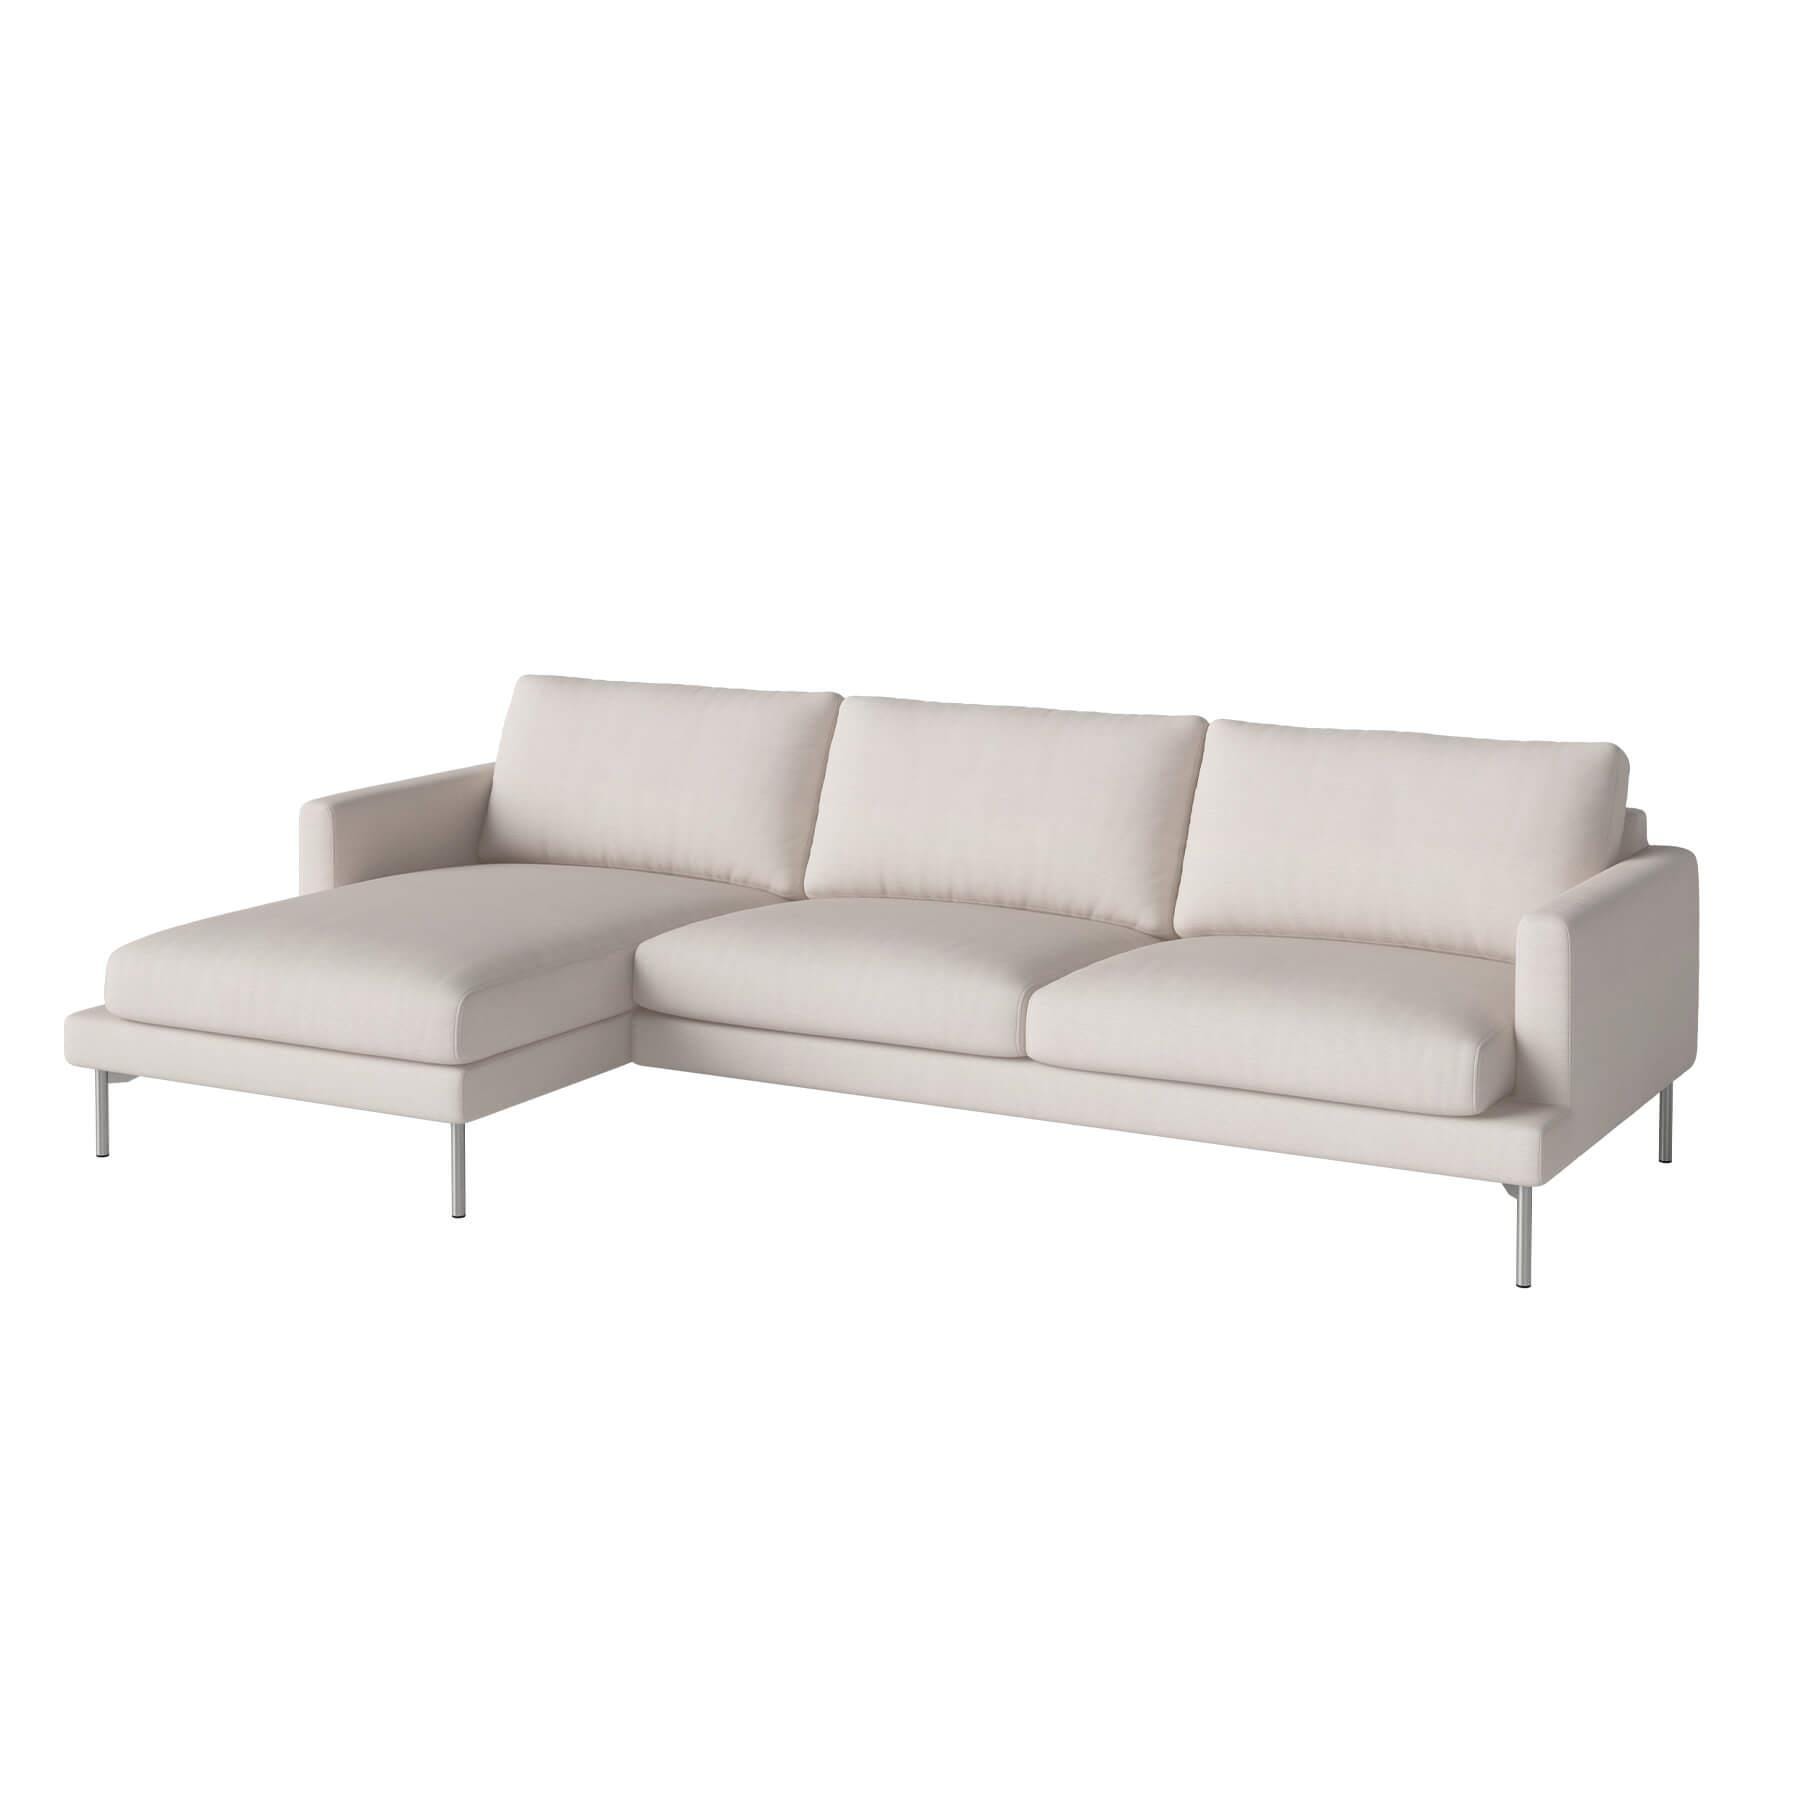 Bolia Veneda Sofa 35 Seater Sofa With Chaise Longue Brushed Steel Linea Beige Left Brown Designer Furniture From Holloways Of Ludlow